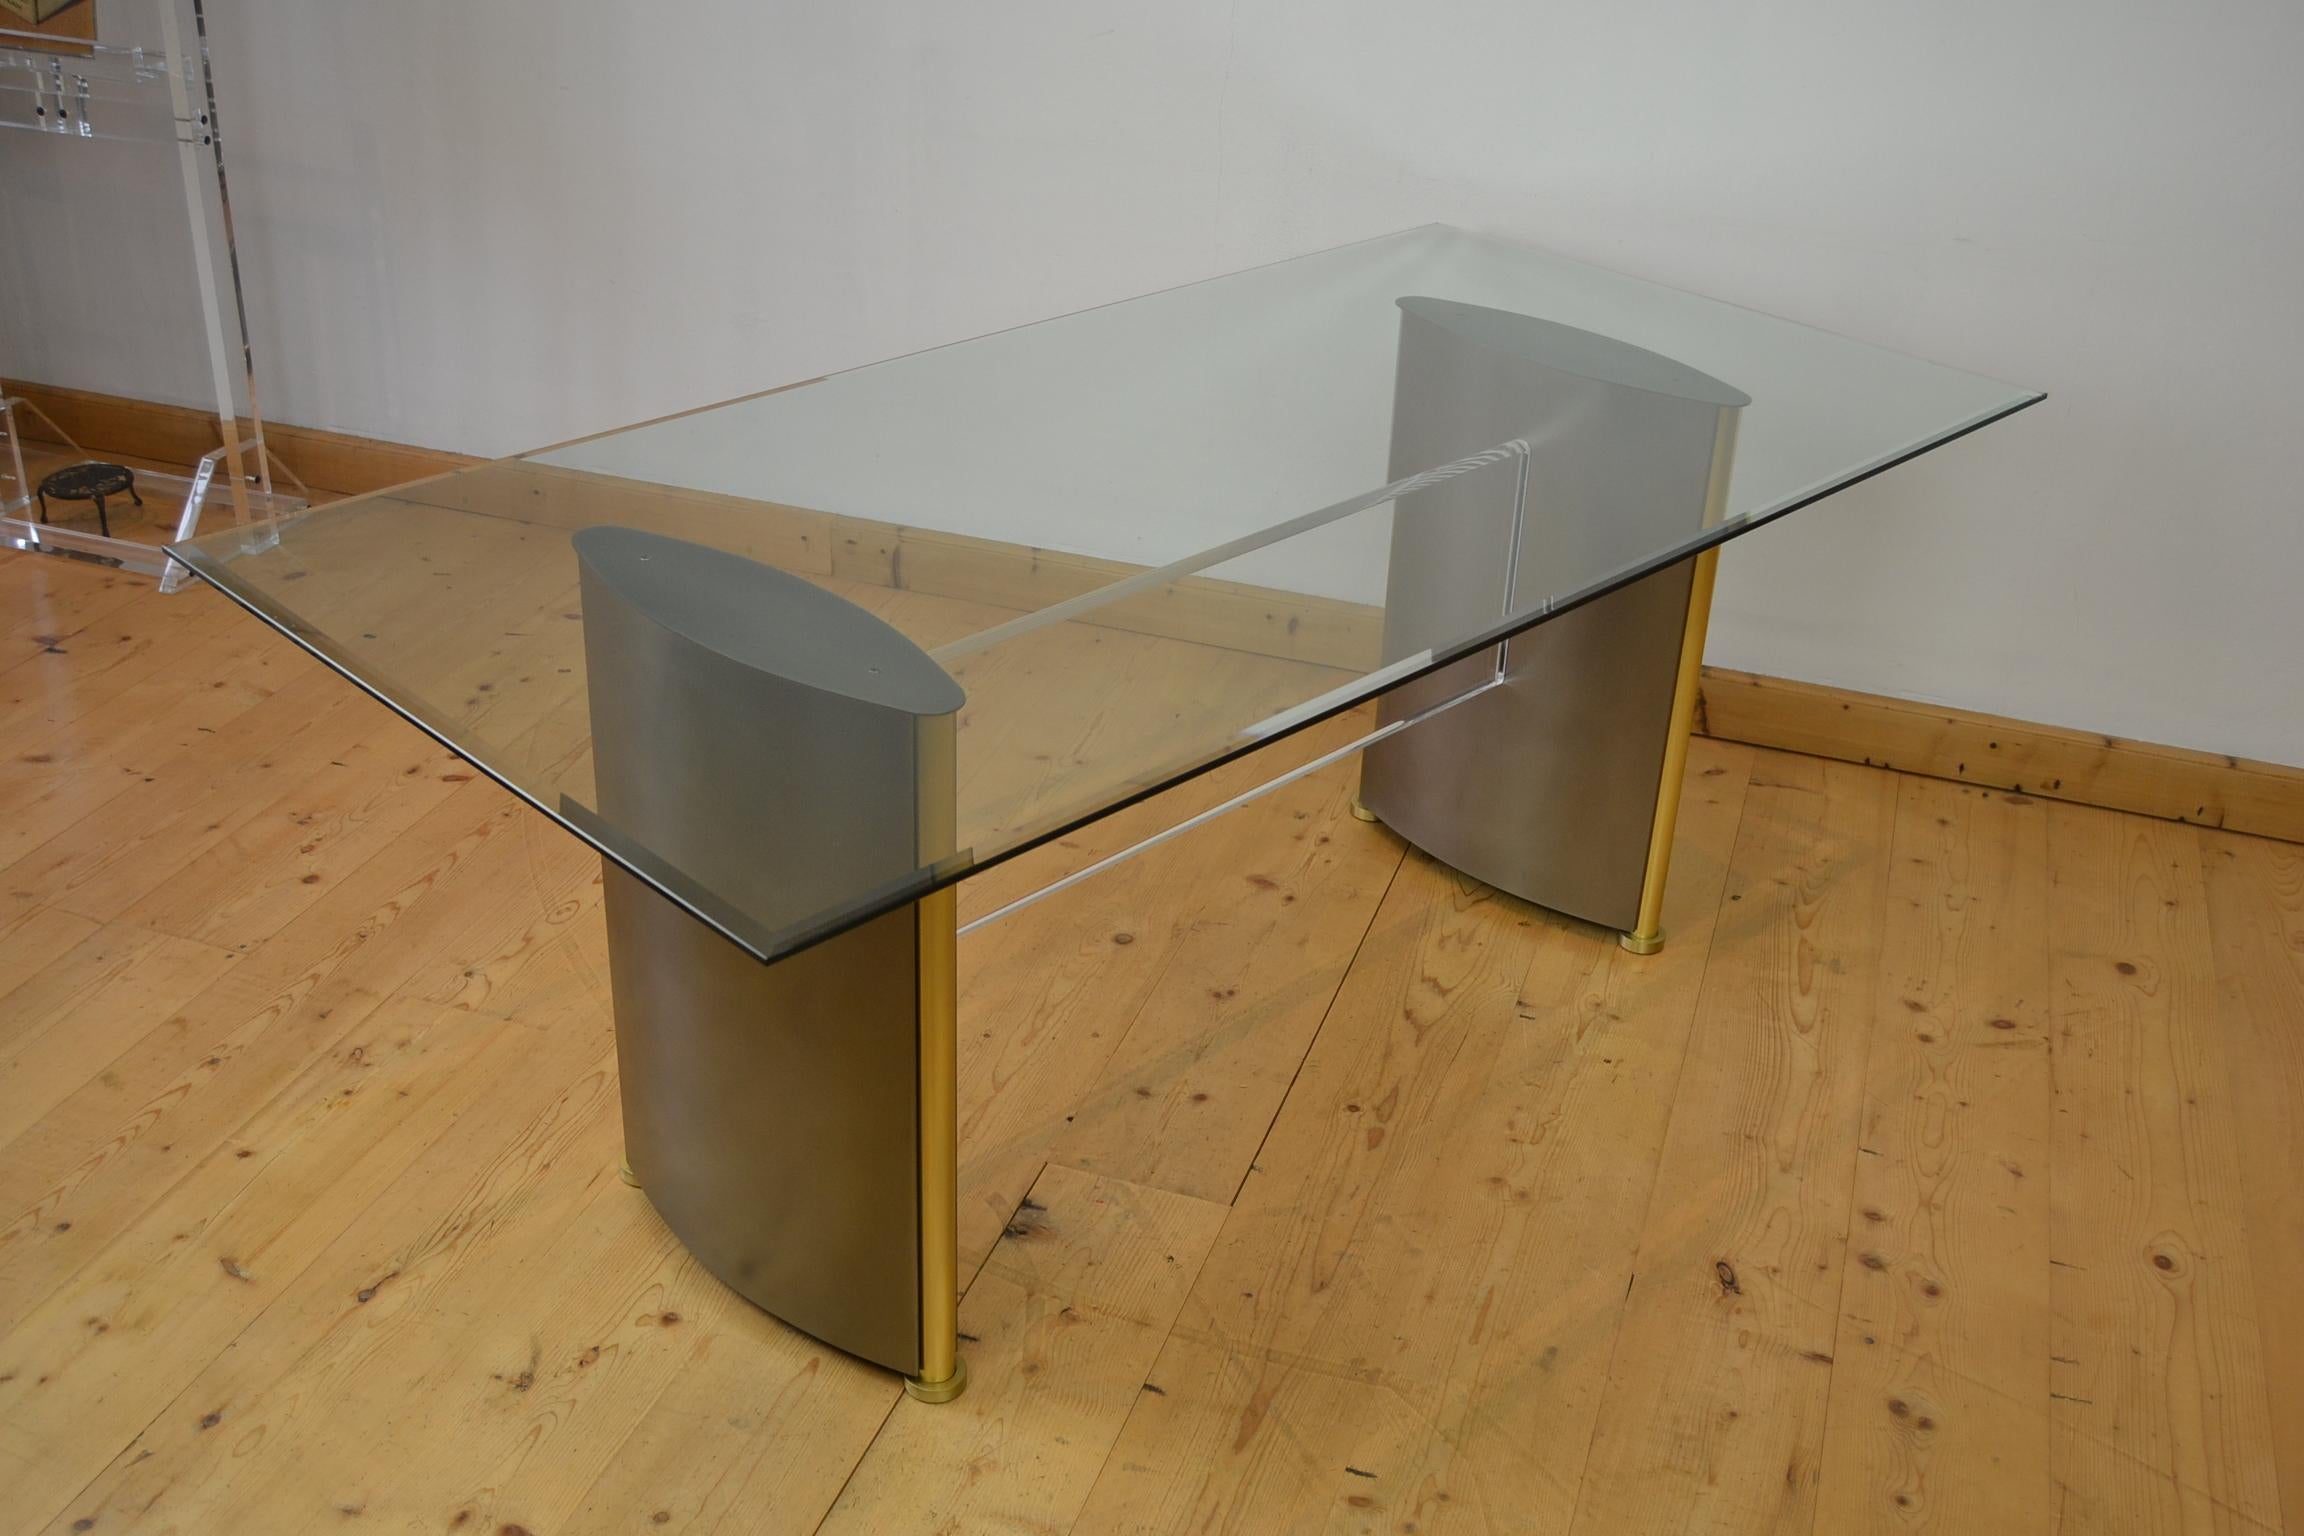 Belgo Chrome dining table. 
This stylish Hollywood Regency Belgochrom table has 2 bronzed patinated metal legs with gold-plated brass details which are connected by a lucite connecting piece. On top you find a thick beveled glass top.
The size of